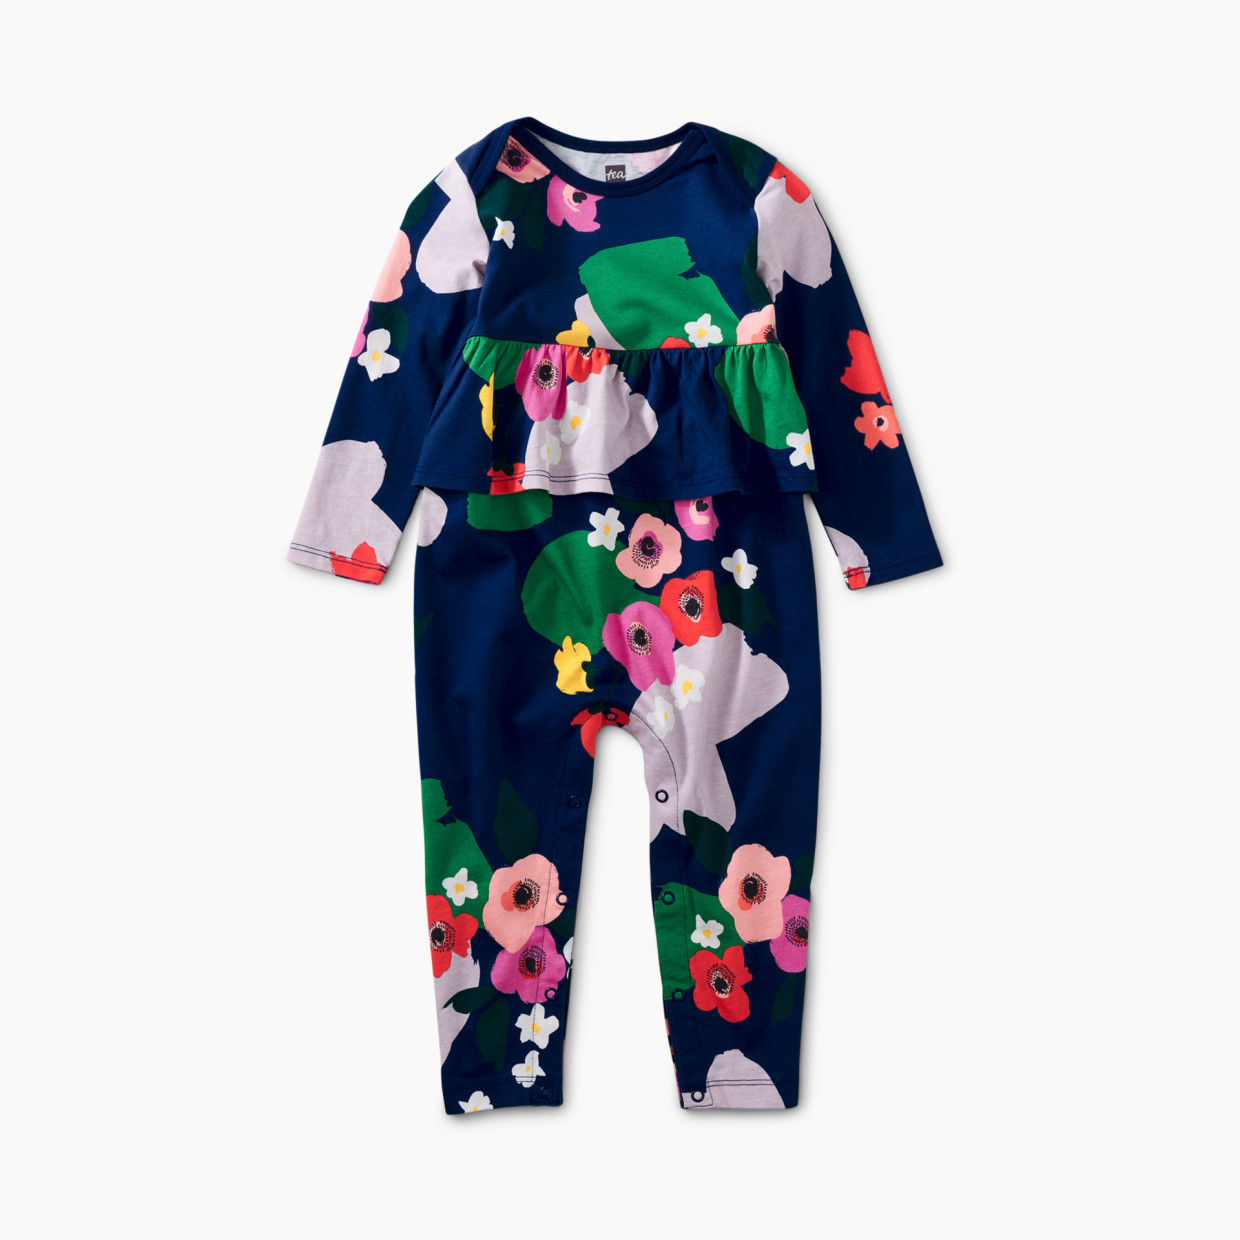 Tea Collection Pretty Peplum Baby Romper - Scottish Painted Floral, 0-3 M.